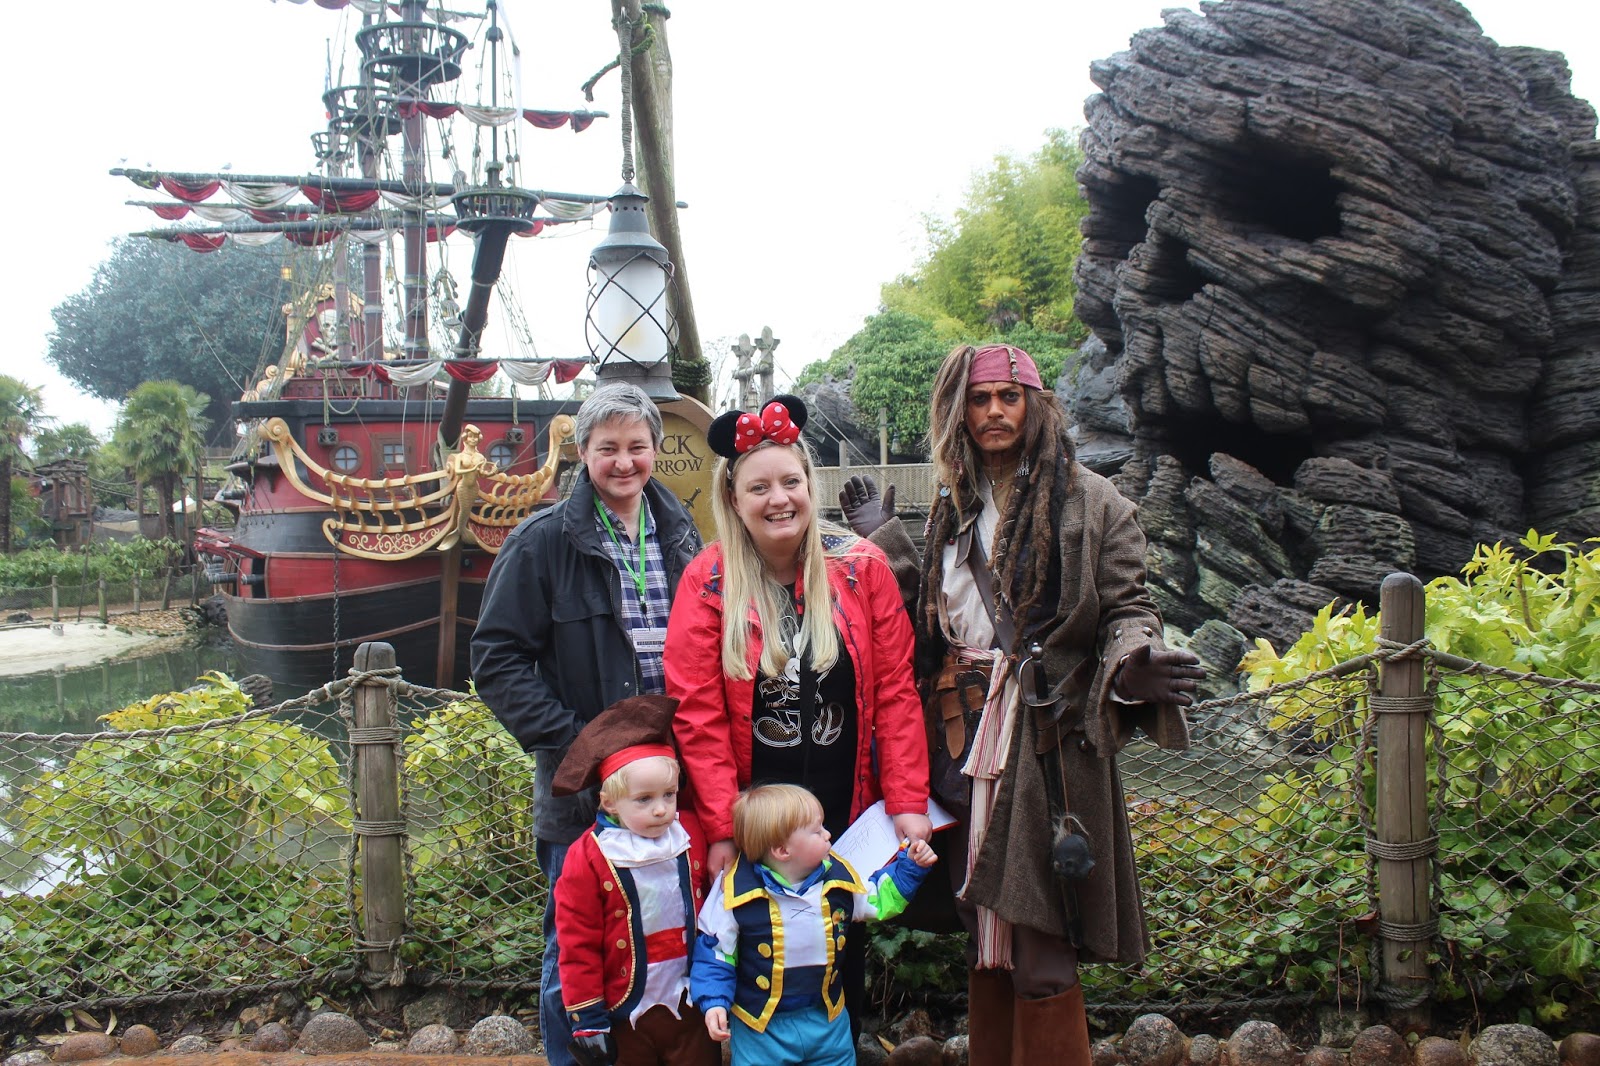 12 Perfect Rides For Toddlers At Disneyland Paris | Sparkle's Suitcase